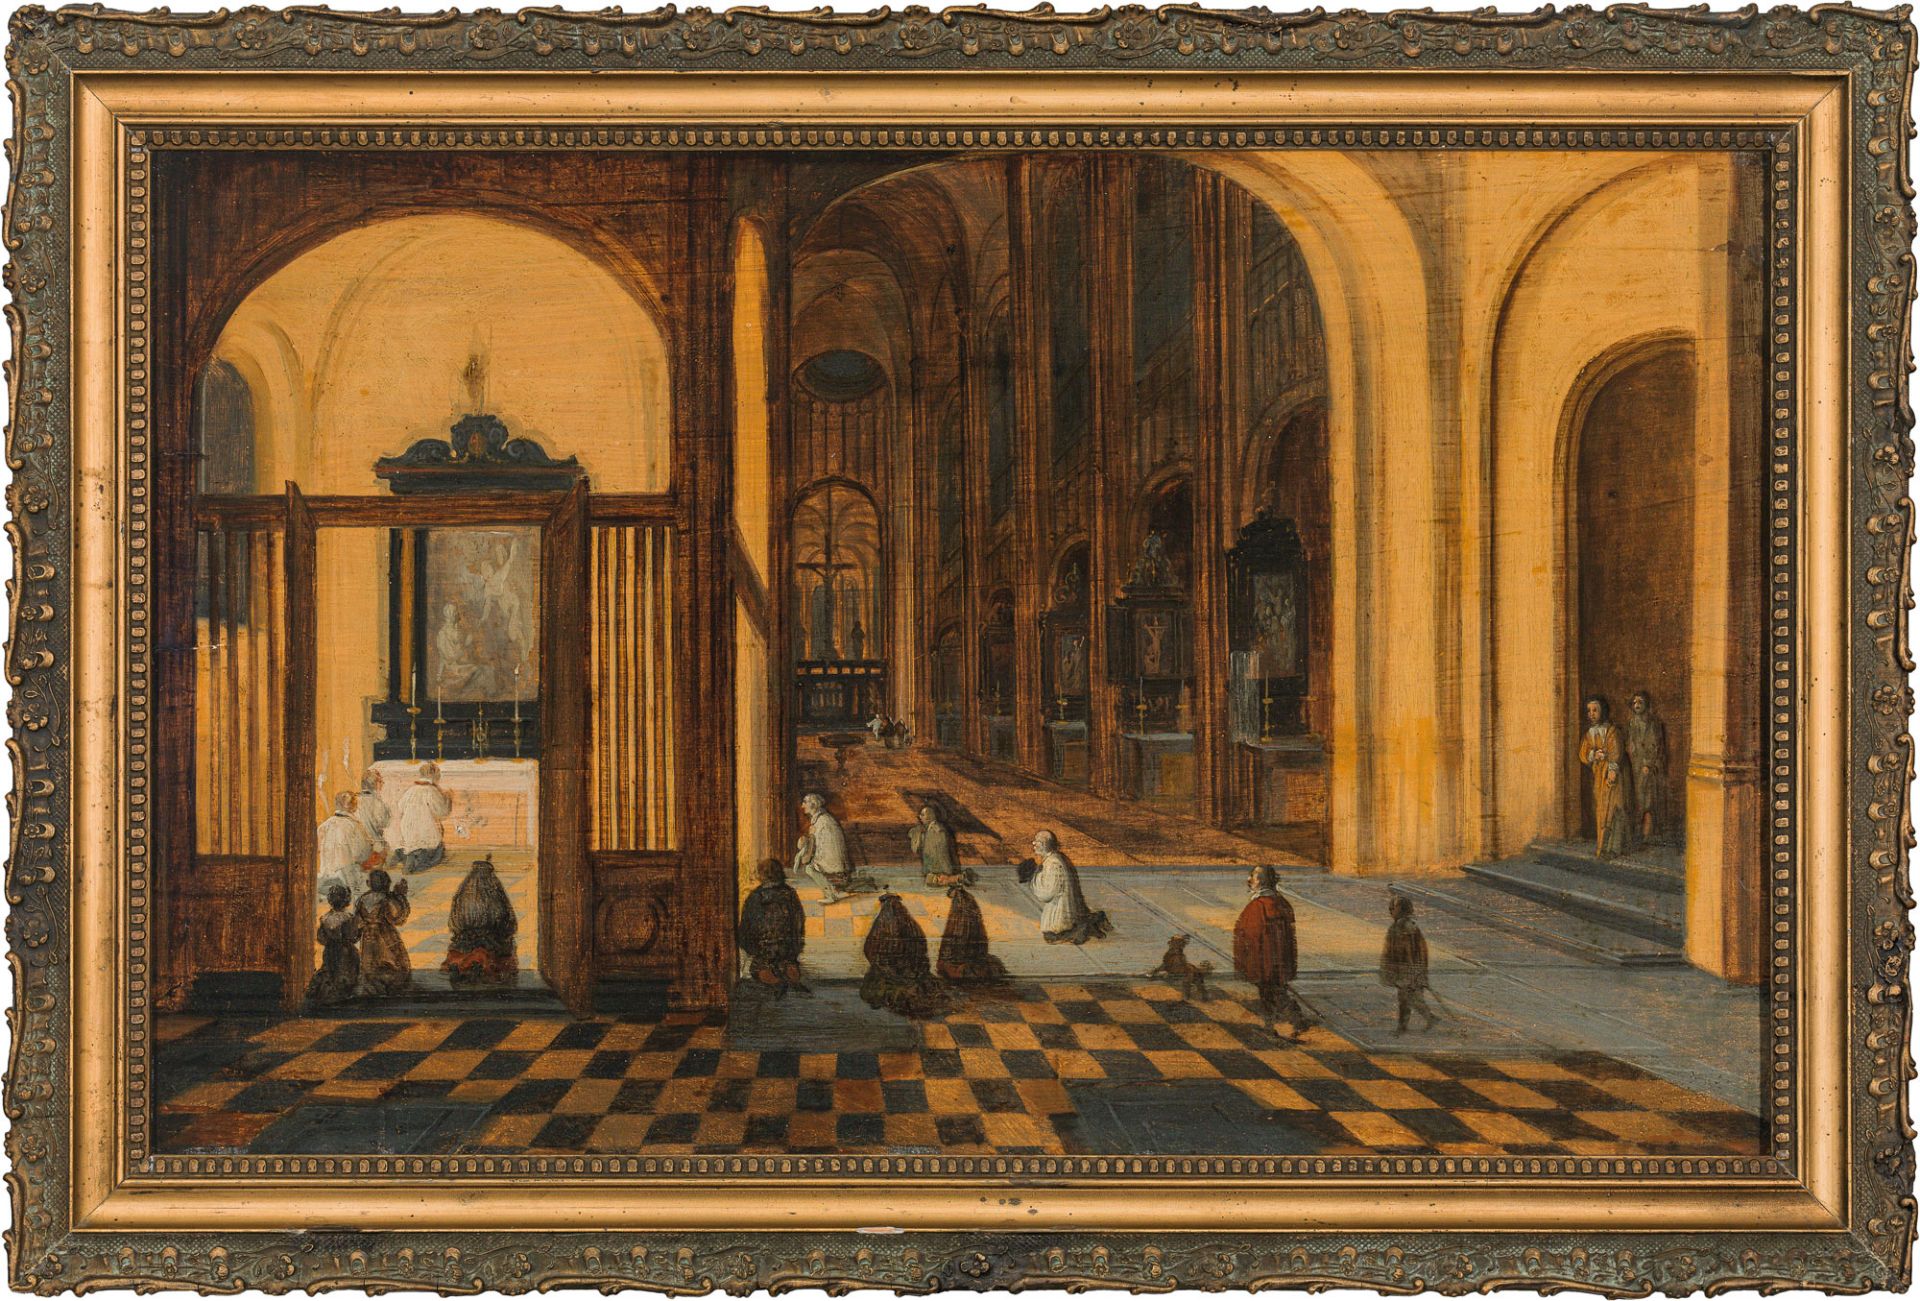 Studio of Pieter Neeffs the Elder, Interior of a Gothic church with service in a side chapel - Image 2 of 2